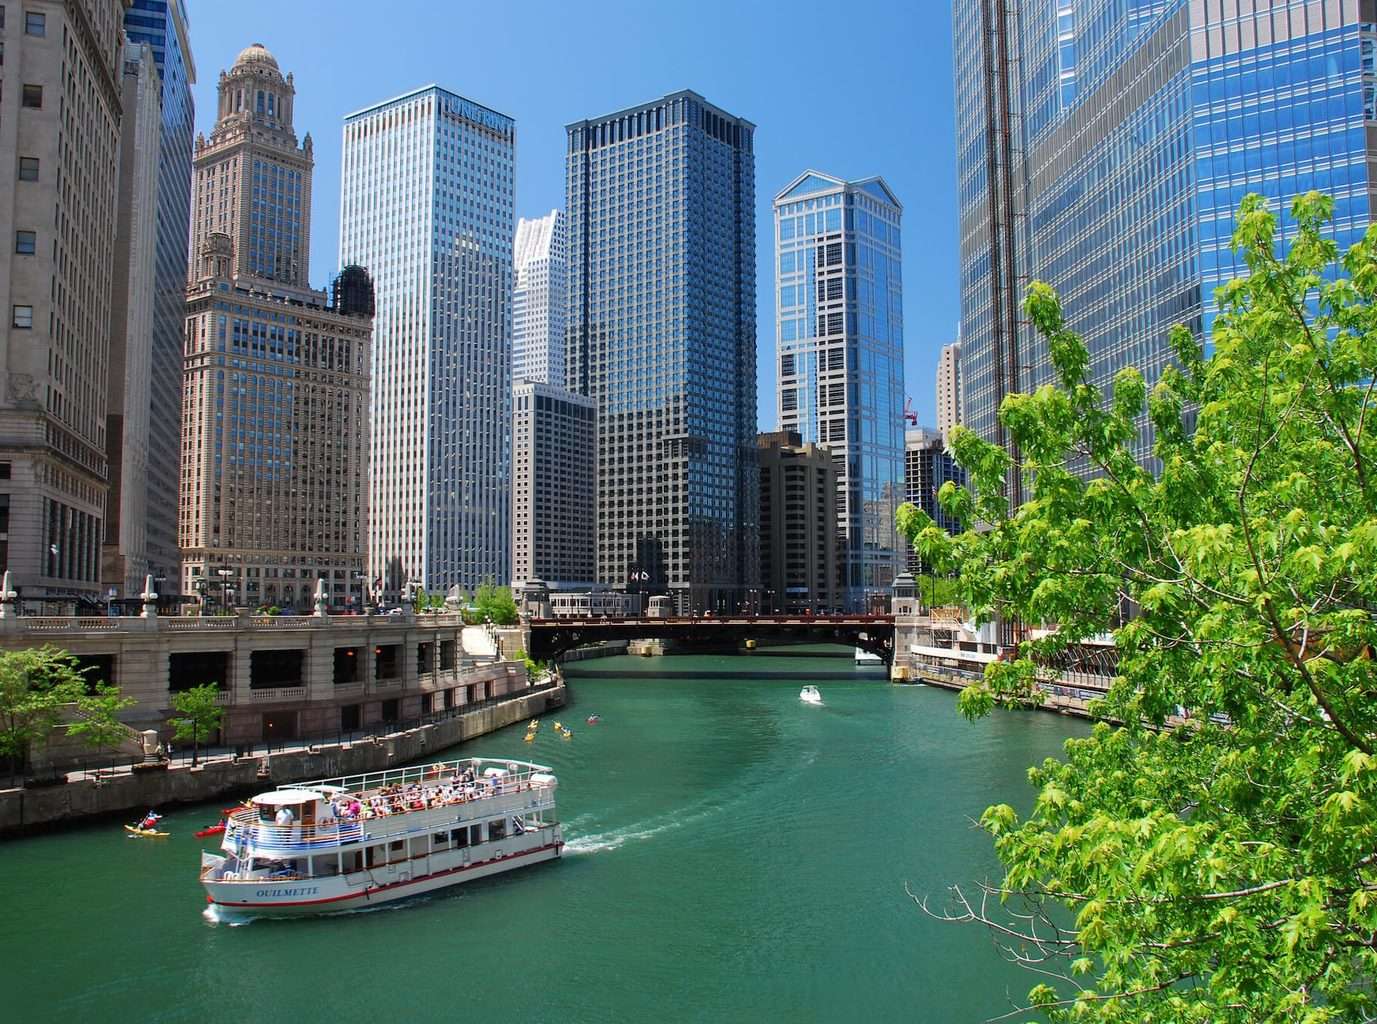 Luxury Trip to Chicago - River encased with glass buildings and skyscrapers